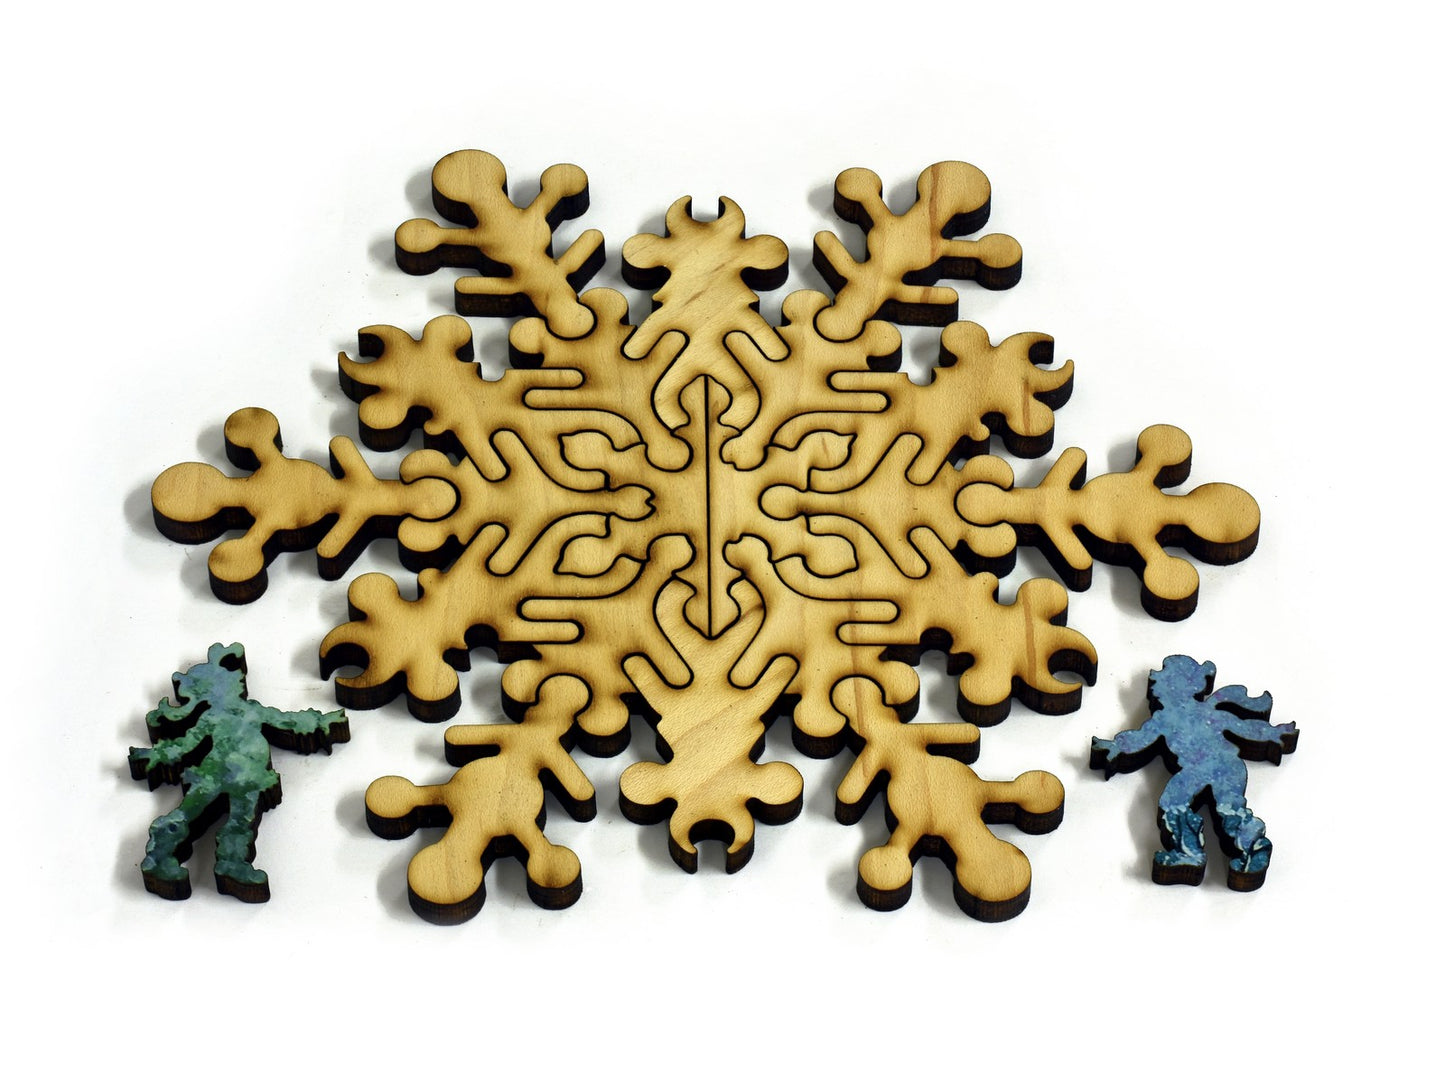 A closeup of pieces in the shape of a large snowflake and two people.